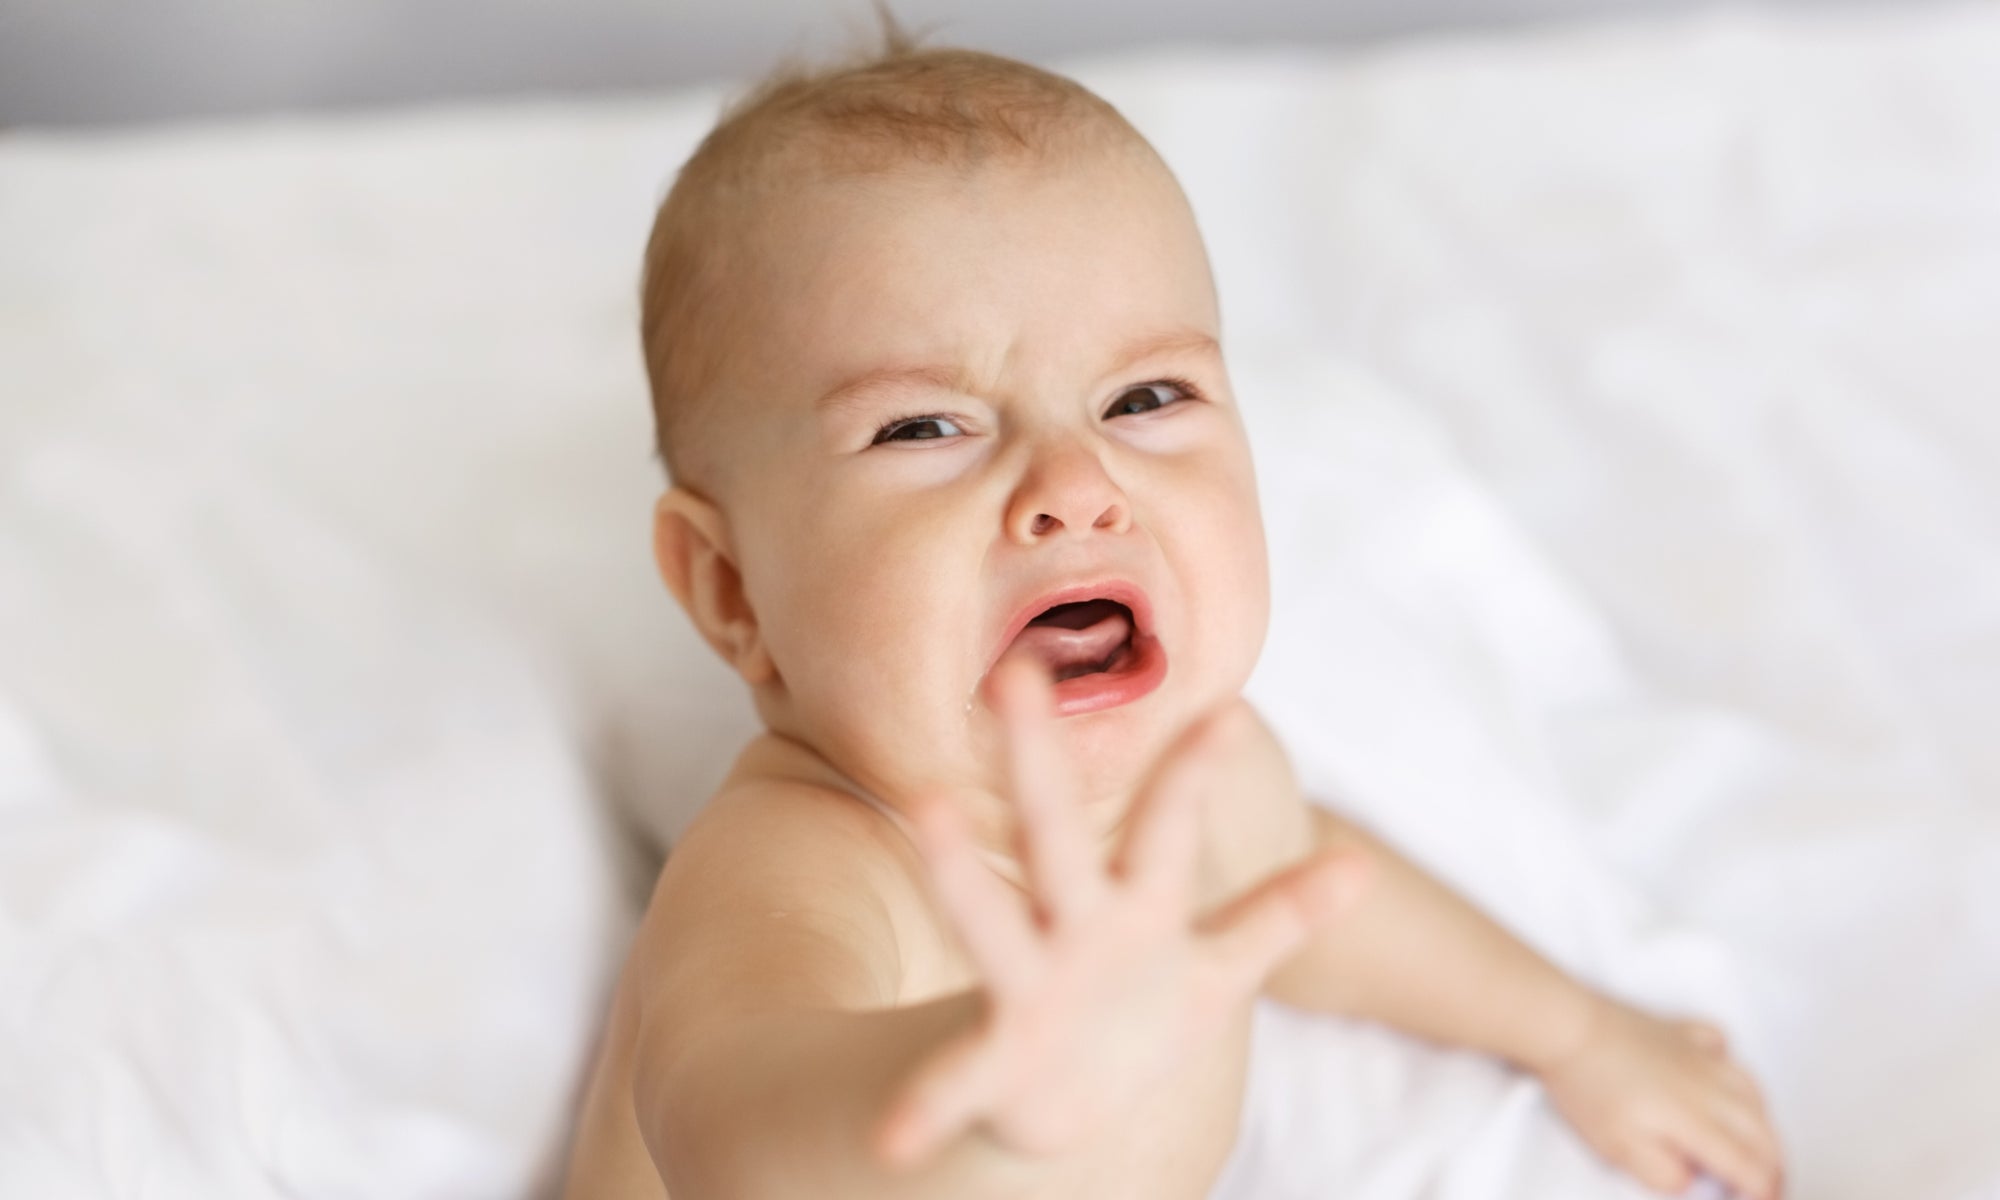 BABY WITH COLIC? HERE'S SOME SOOTHING TECHNIQUES